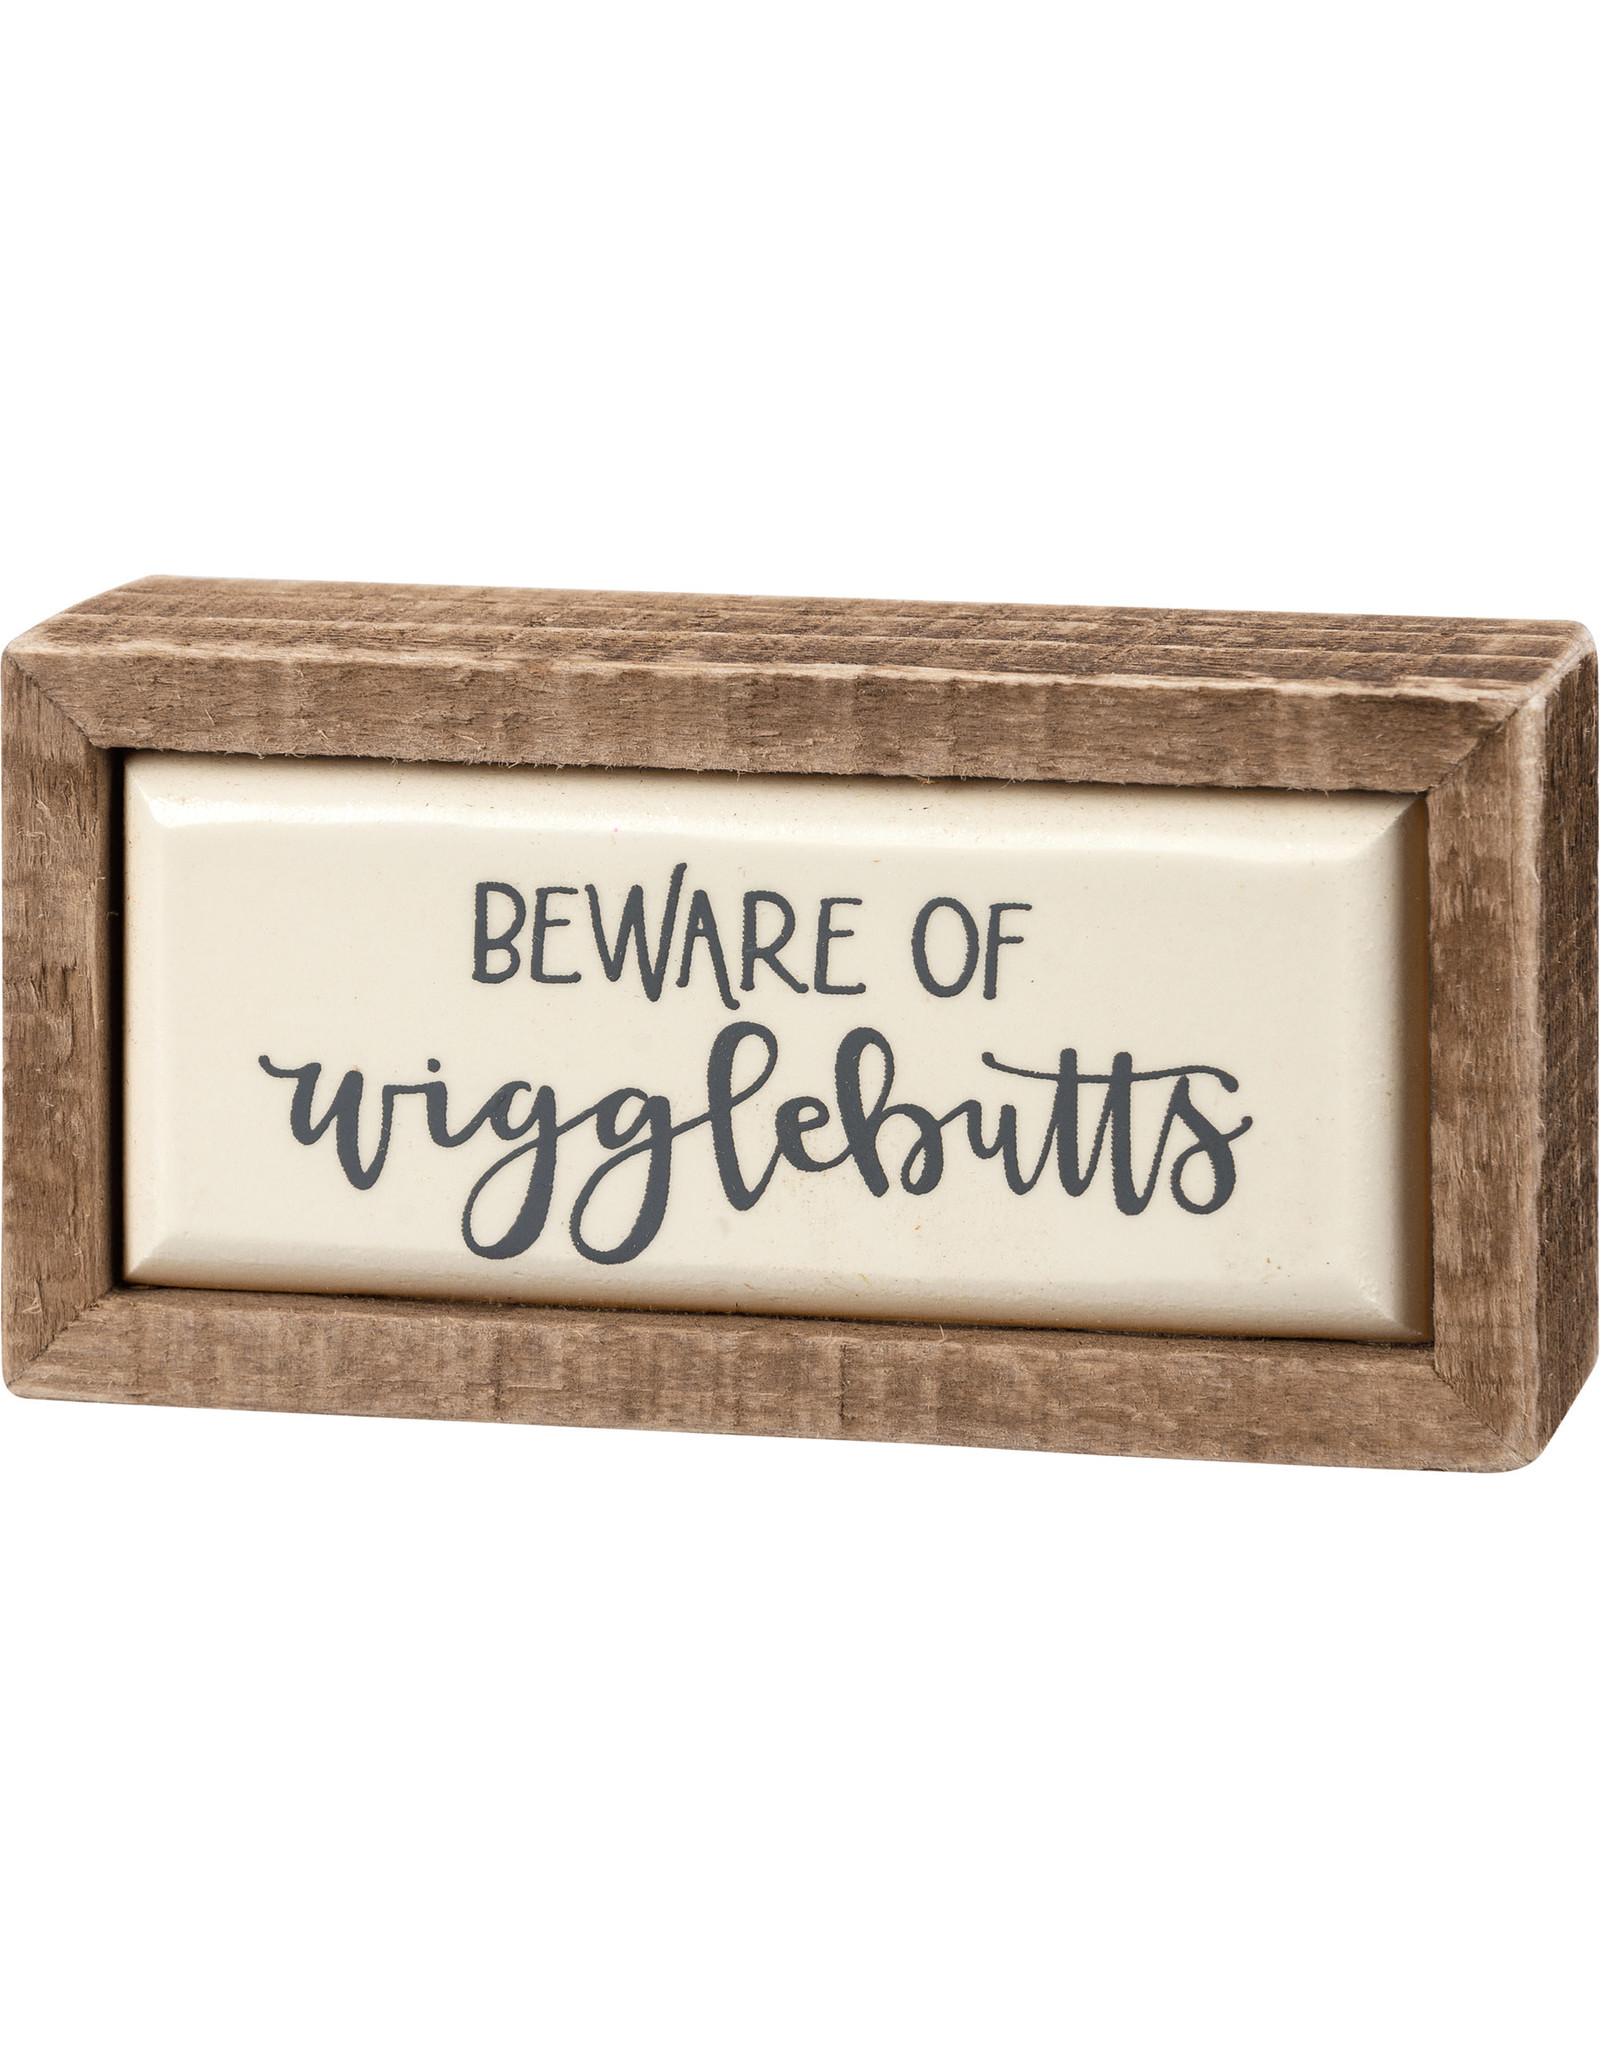 PRIMITIVES BY KATHY PET LOVER BLOCK SIGNS MINI BEWARE OF WIGGLEBUTTS